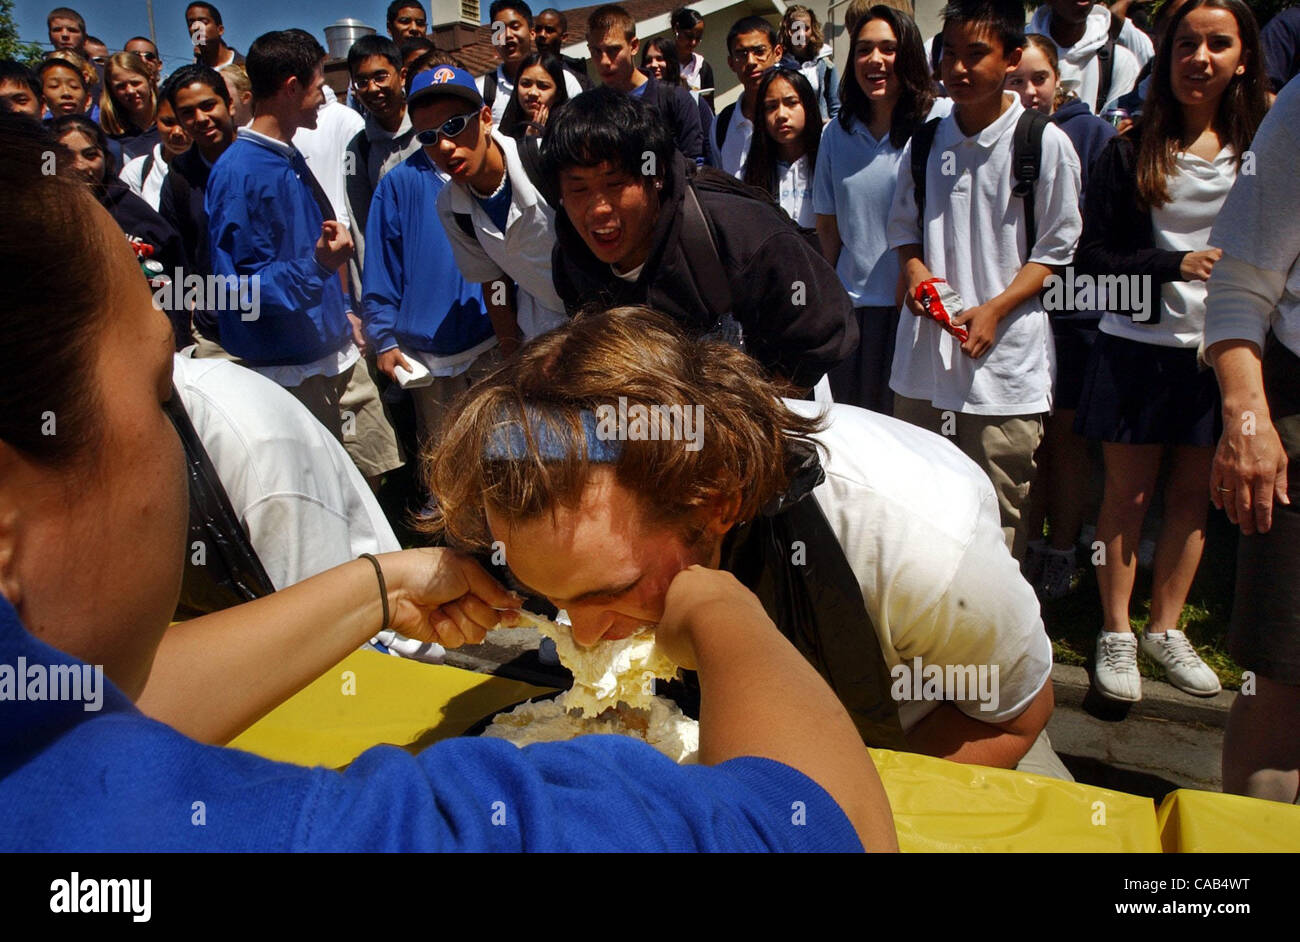 The Pi Festival took place this week at St. Joseph's High School in Alameda, Calif., where the endless number pi was celebrated. On Friday, April 23, 2004, the festival was wrapped up with a pie eating contest, won by Jacob Benz, 17, after eating 496 grams of a lemon cream pie fed to him by Gabriell Stock Photo